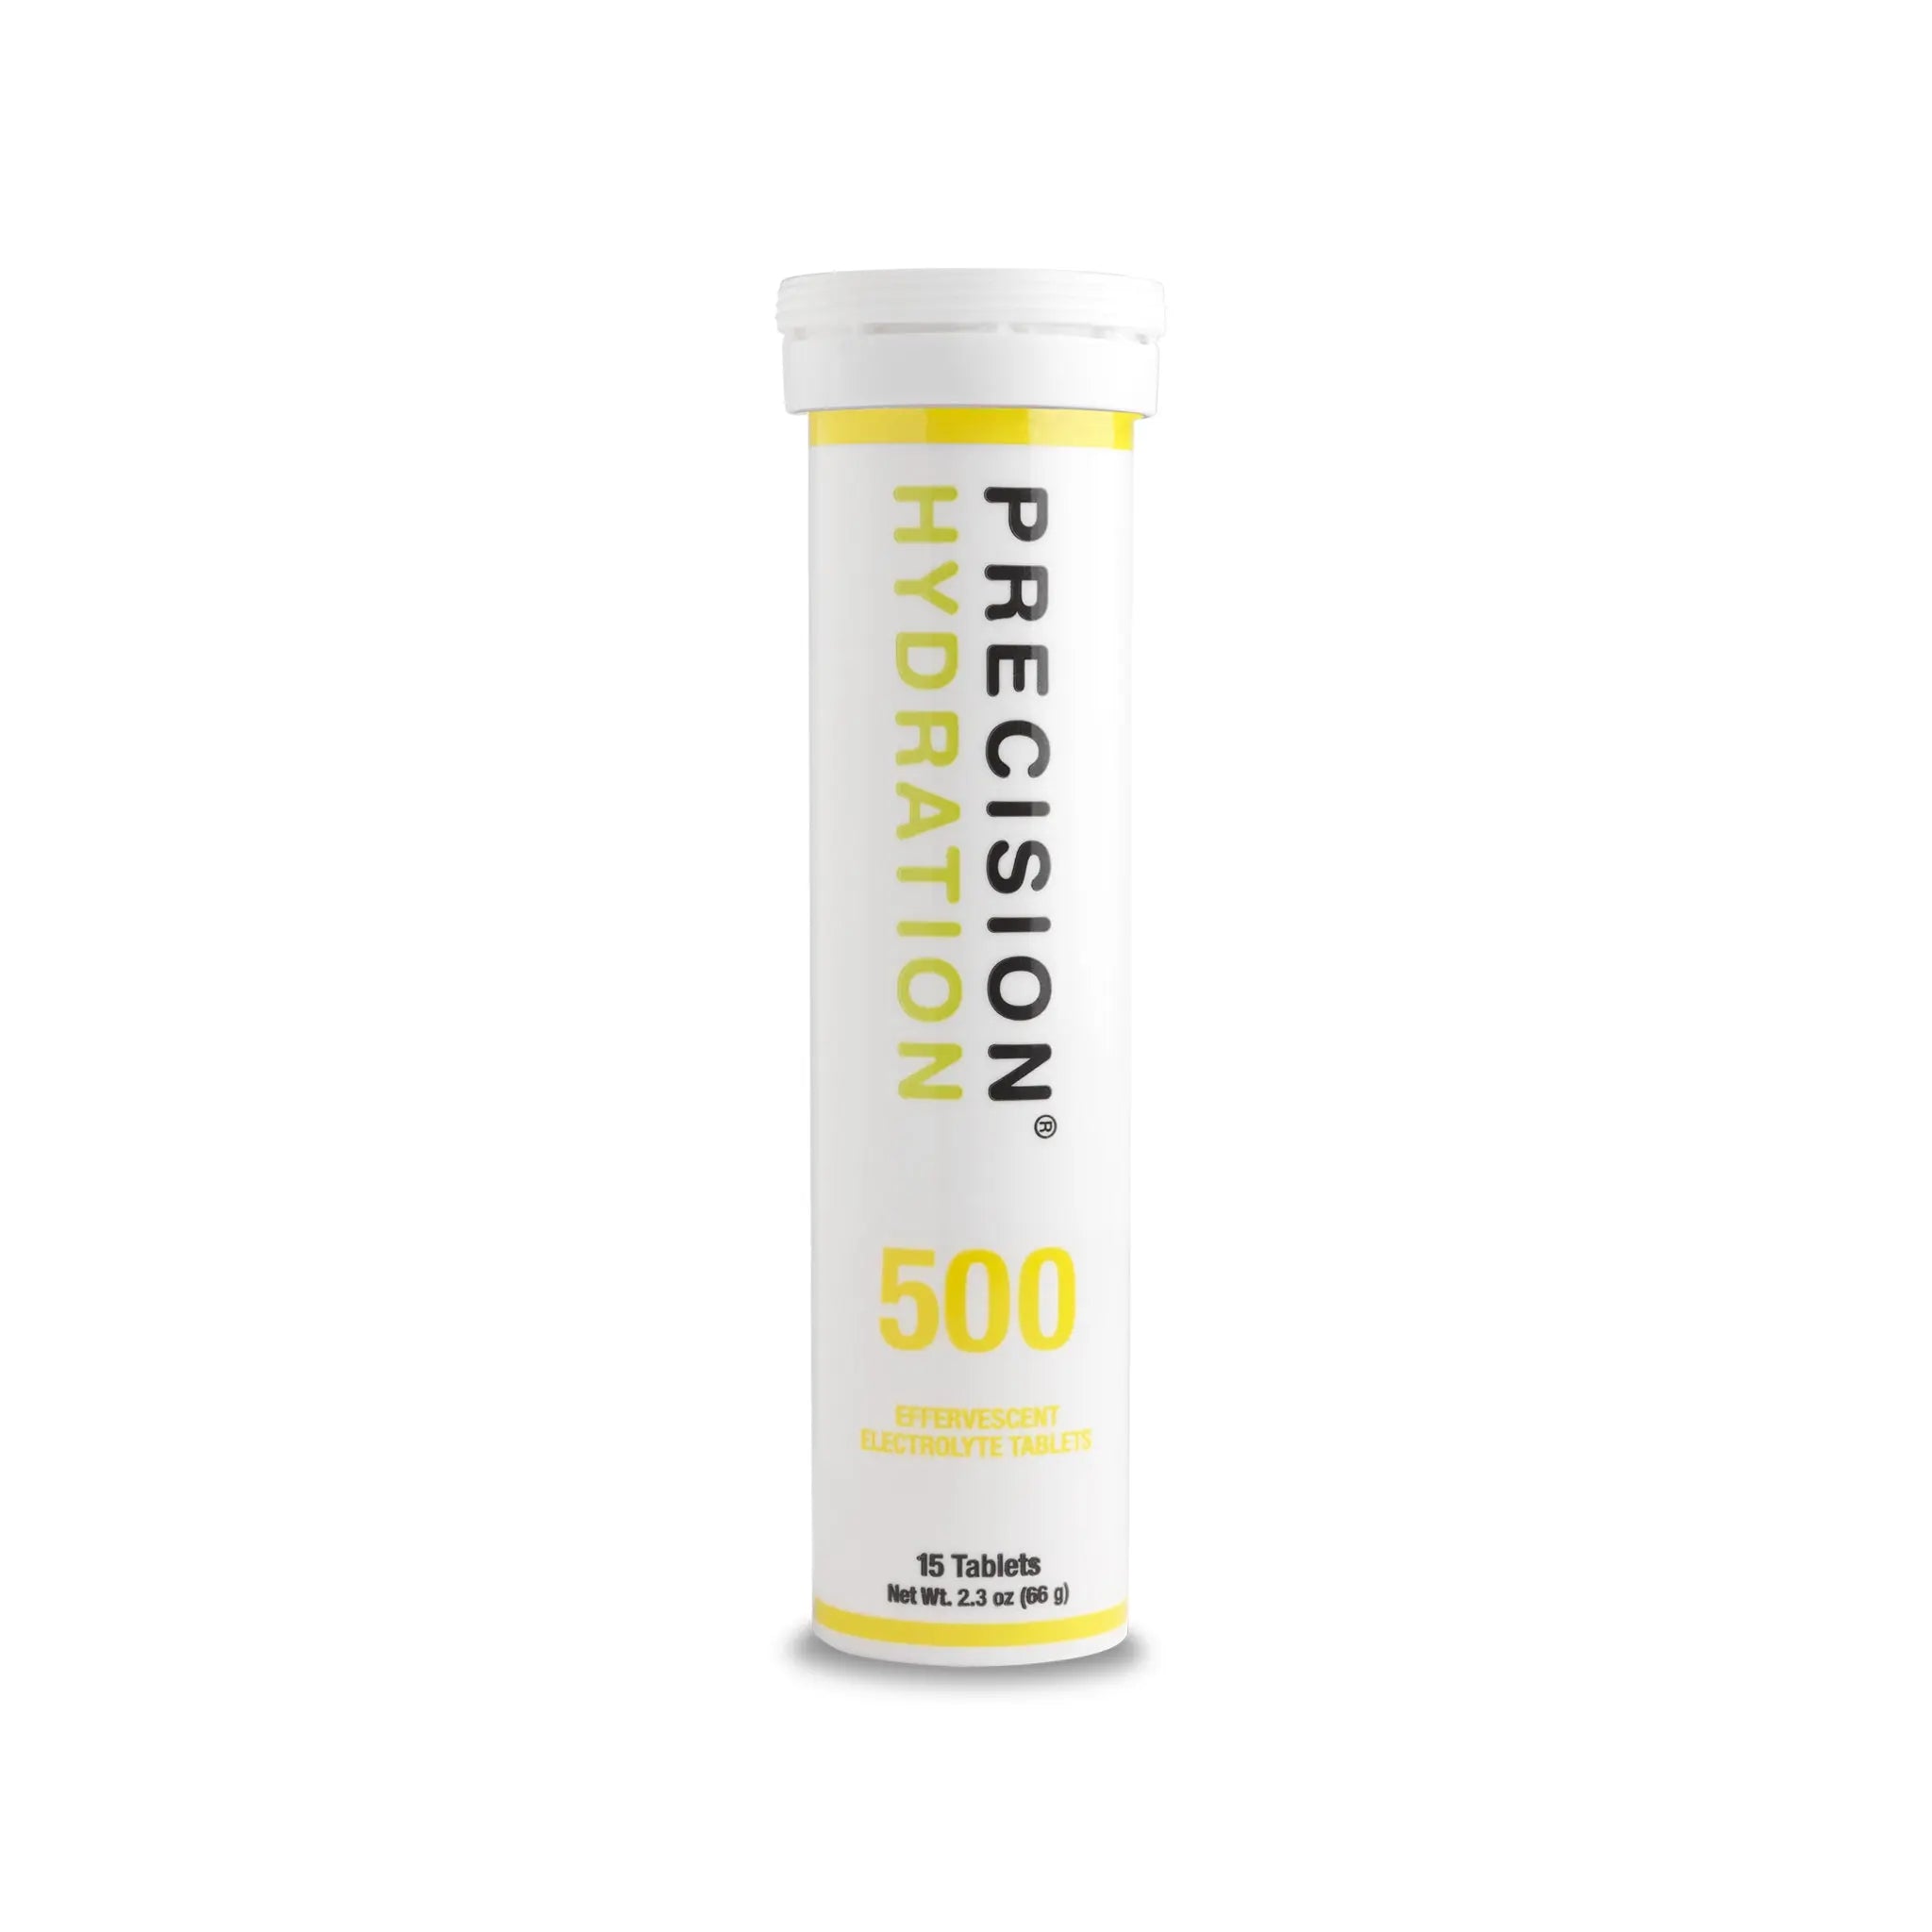 Precision Fuel & Hydration Electrolyte Tablets